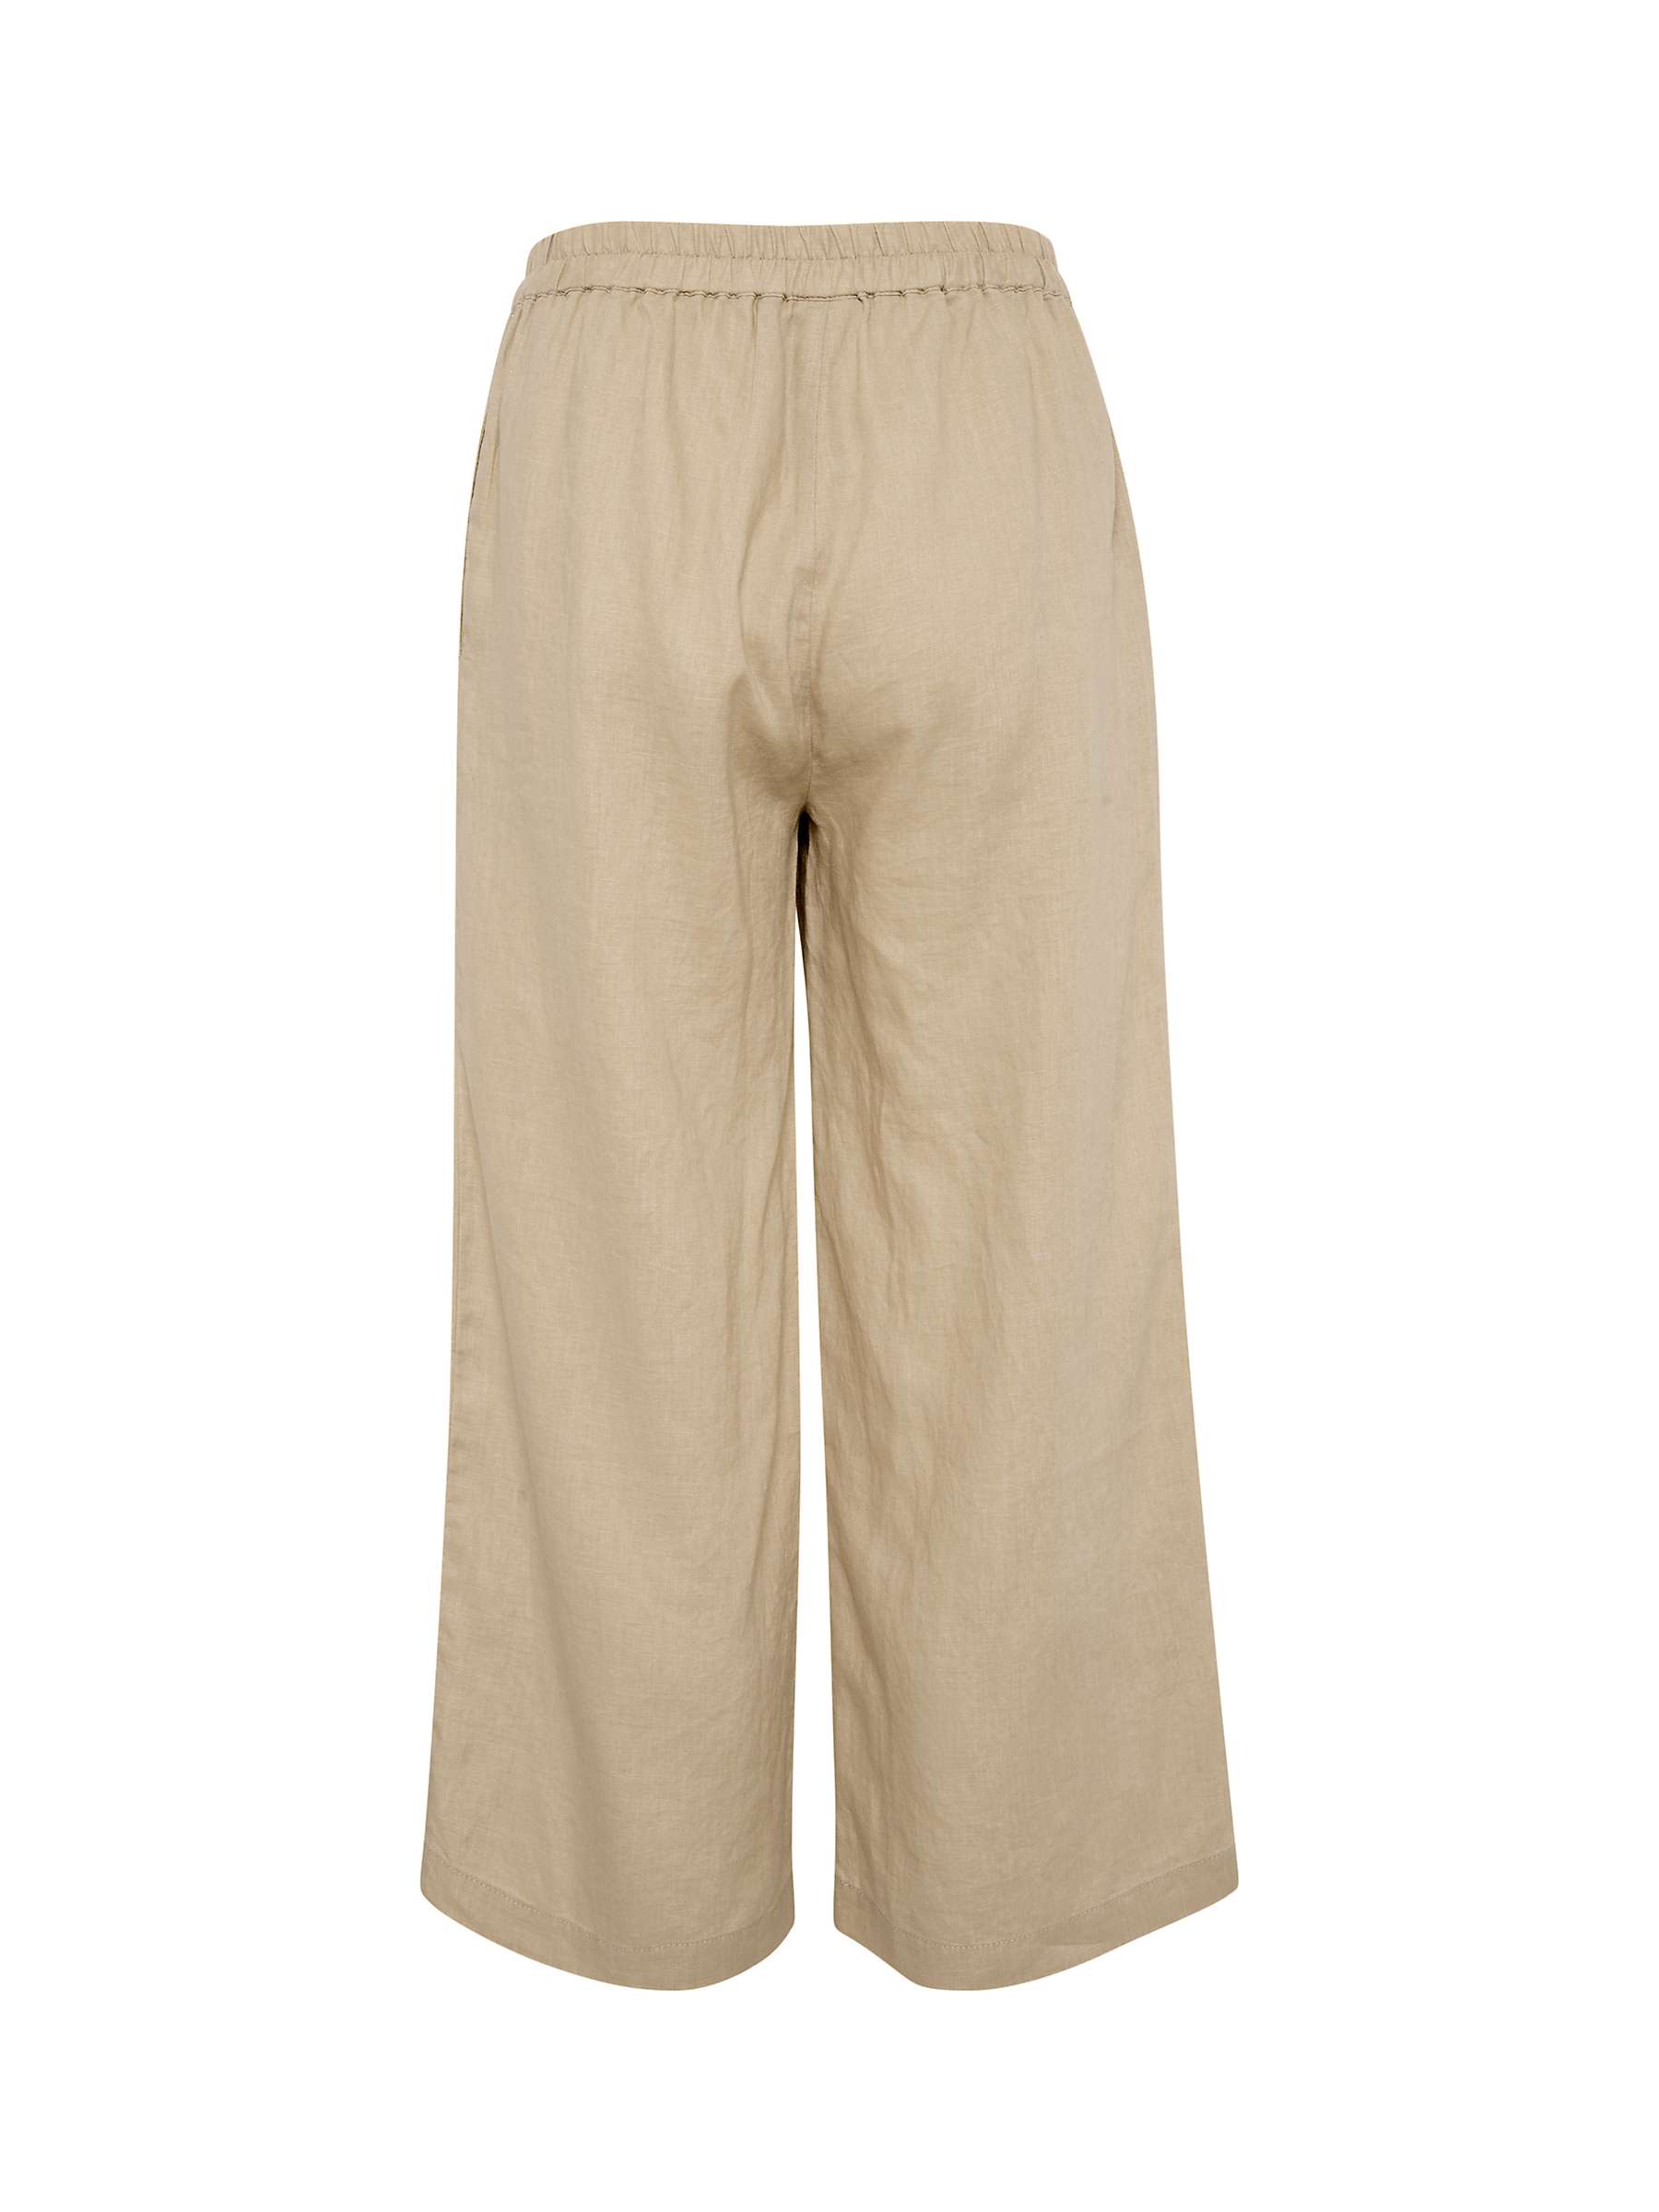 Buy Part Two Petrines Linen Wide Leg Cropped Trousers Online at johnlewis.com